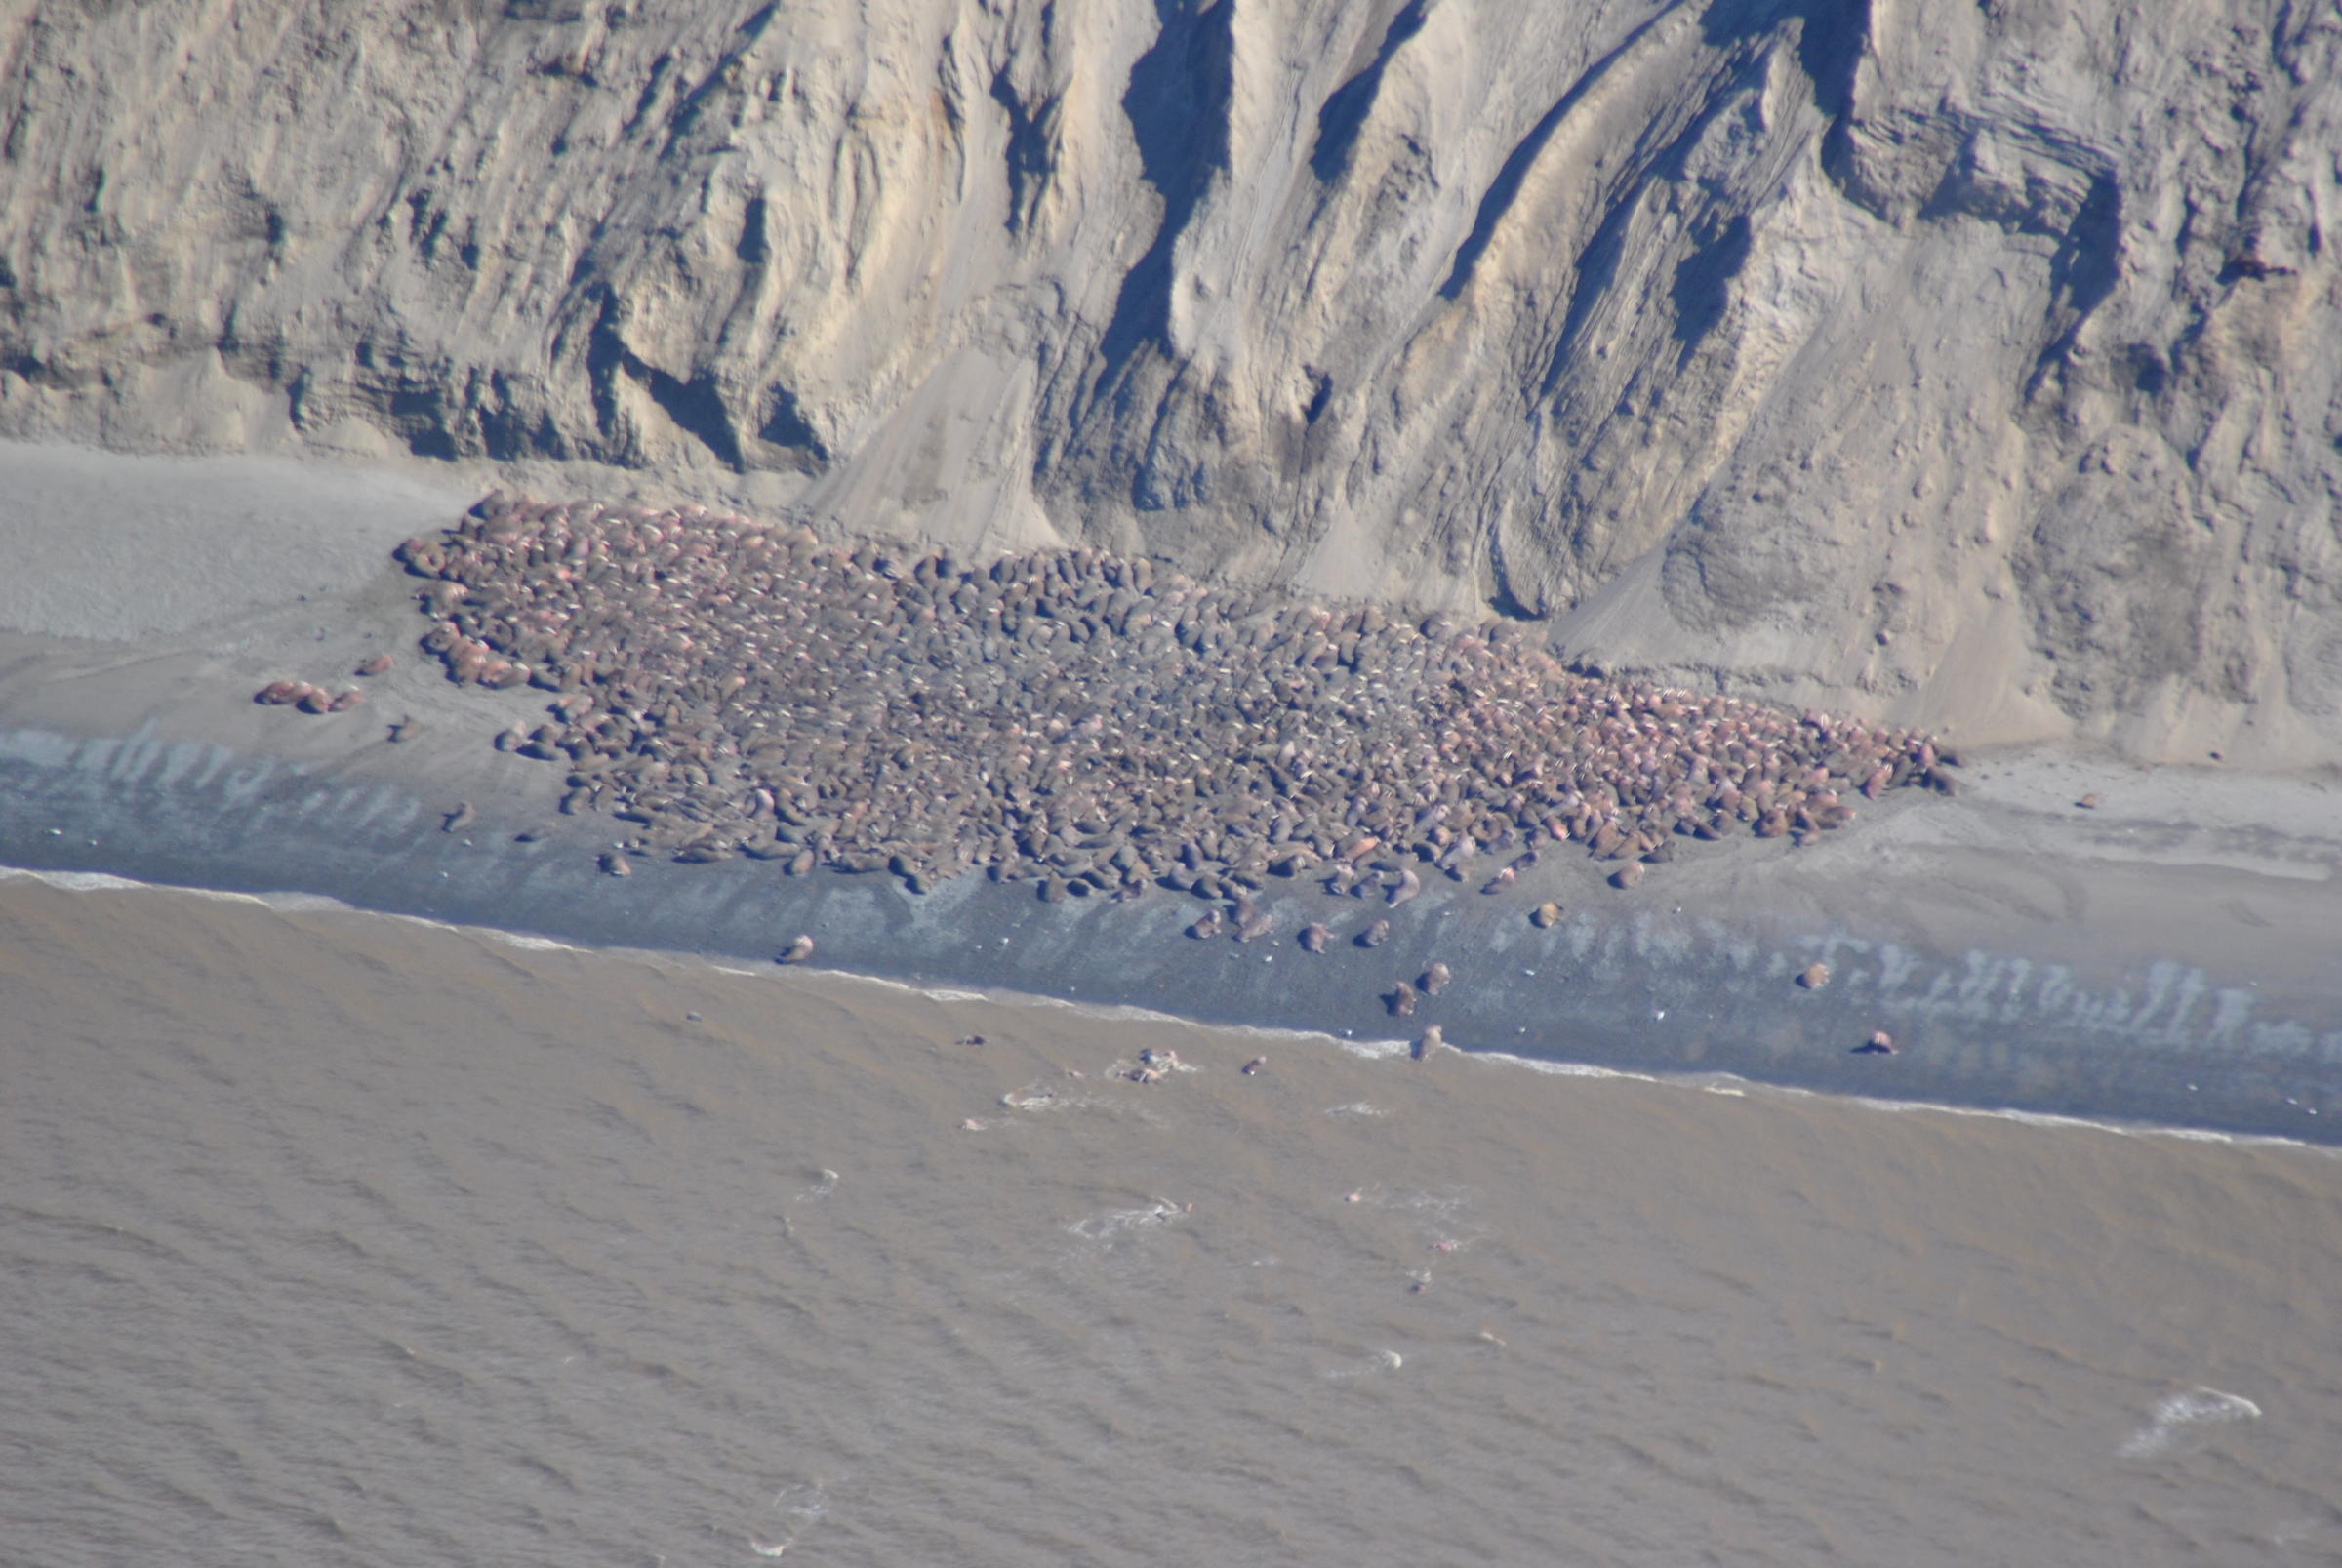 These walruses are hauled out at Cape Grieg, a spot in between Egegik and Ugashik on the Alaska Peninsula. This appears to be a new haul out spot, and biologist aren't sure why it was picked or how long the walruses will stick around. (Photo courtesy of USFWS)